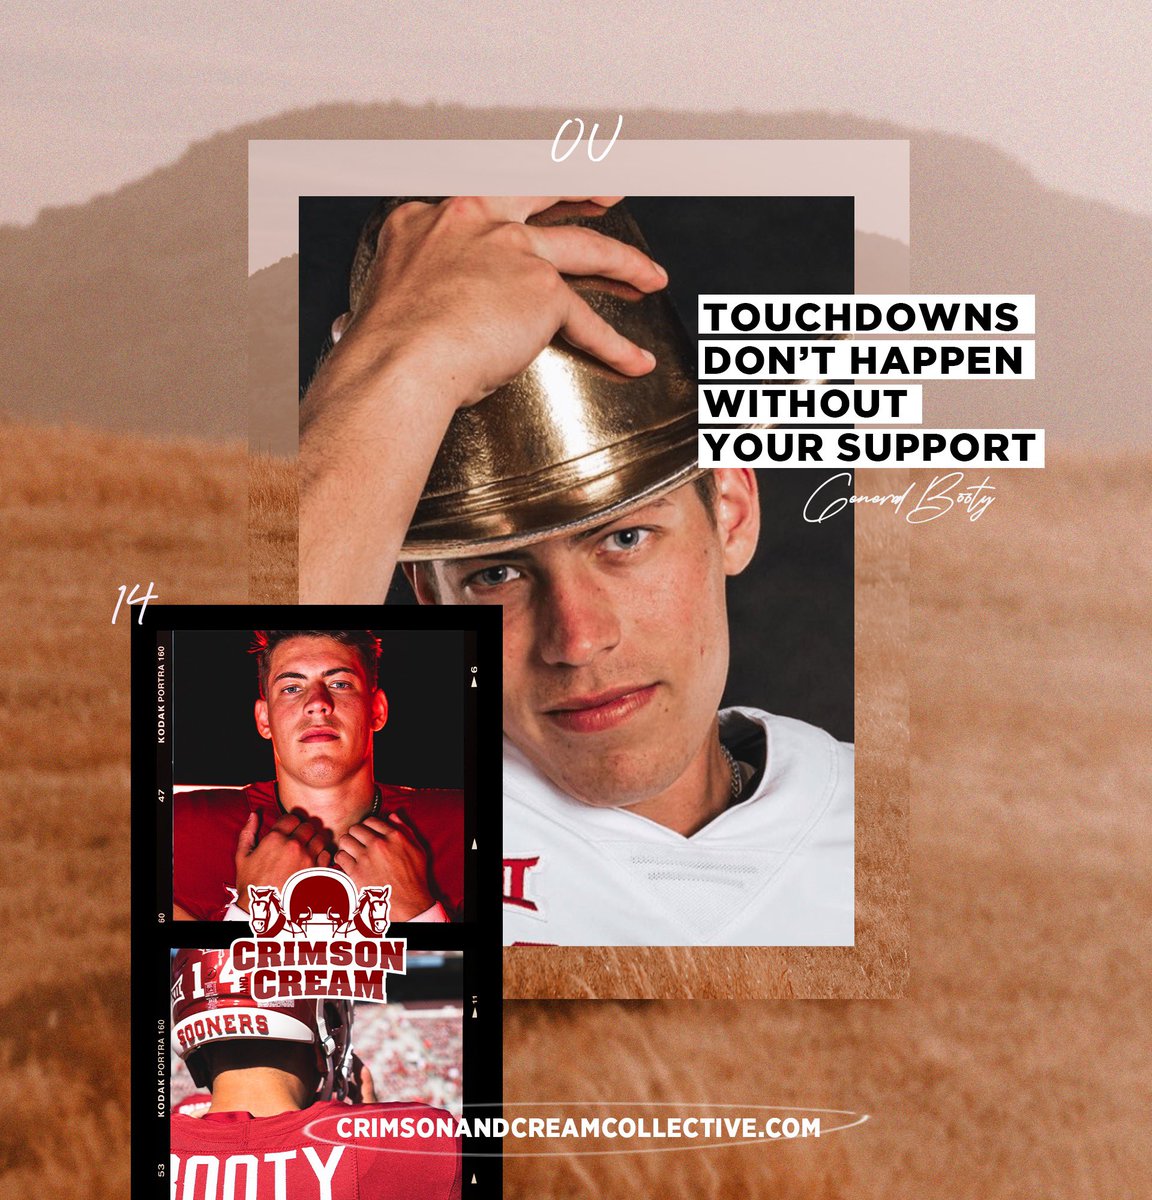 The Golden Hat is back where it belongs thanks to the support Sooner Nation provides to @OU_Football Help us keep the momentum by contributing to @CrimsonCreamNIL today! crimsoncreamcollective.com/feeds/contribu… 🏈 🏆